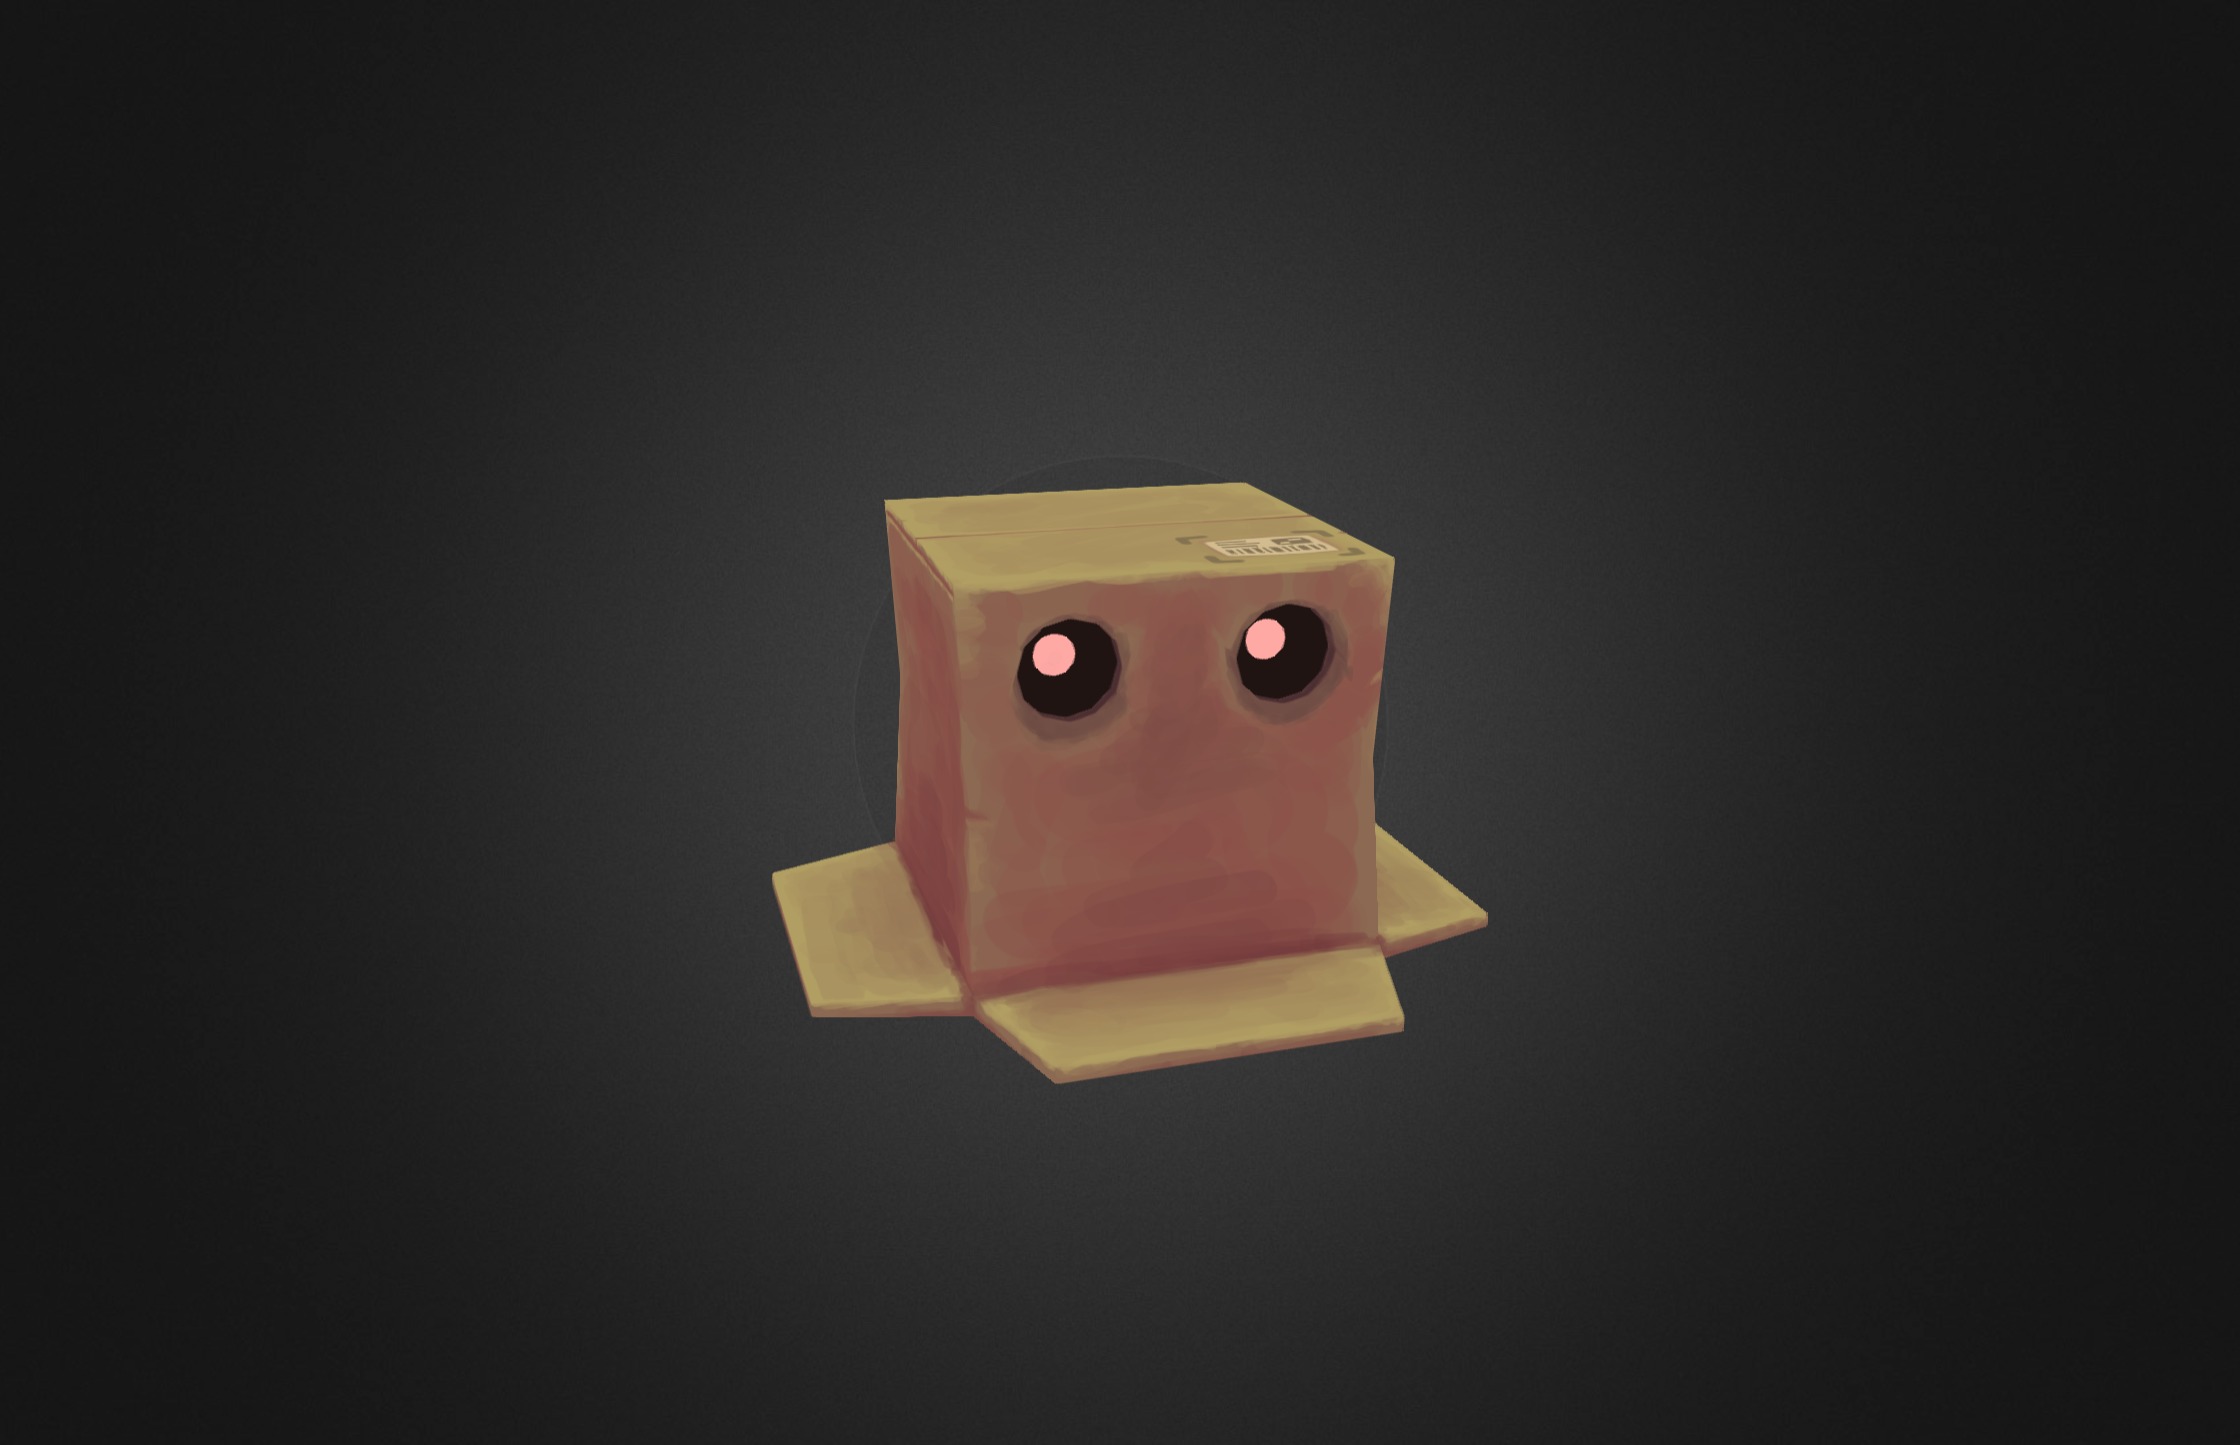 Nothing to see here, just a normal box 3d model